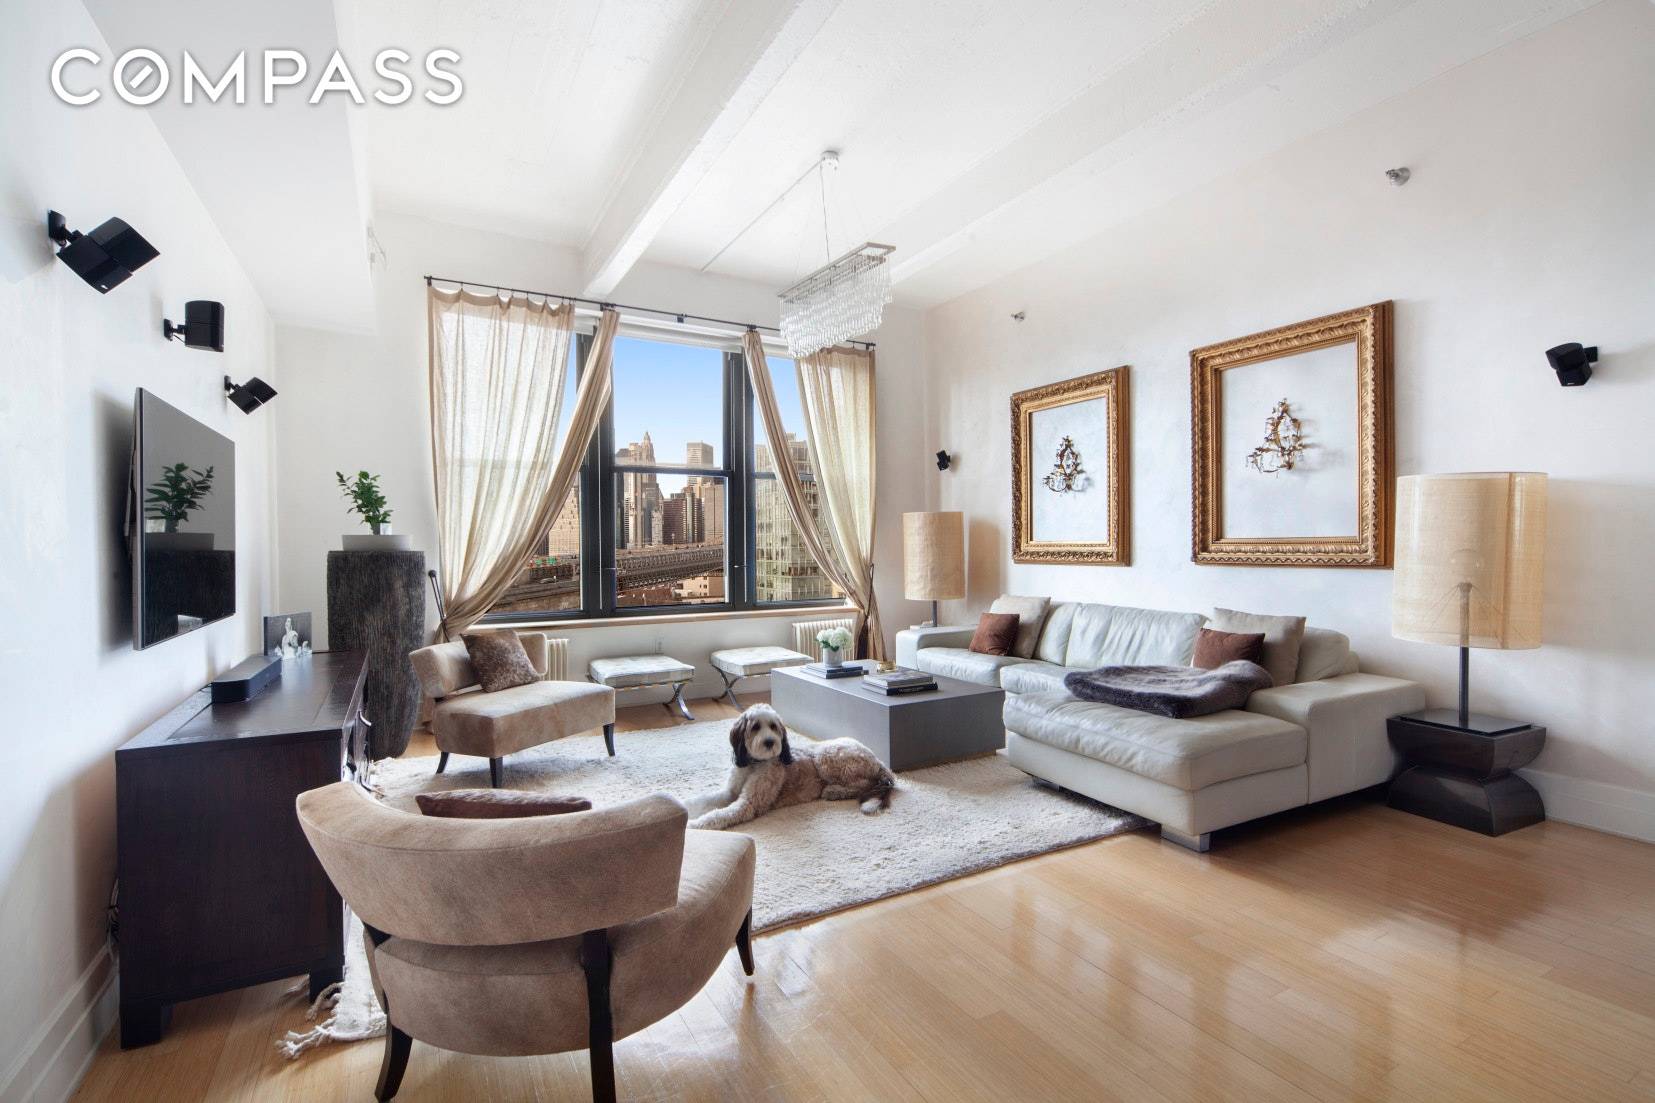 Enjoy ideal Dumbo living in this spacious and bright oversized studio loft with interior home office in one of the neighborhood's premier luxury condominium buildings.